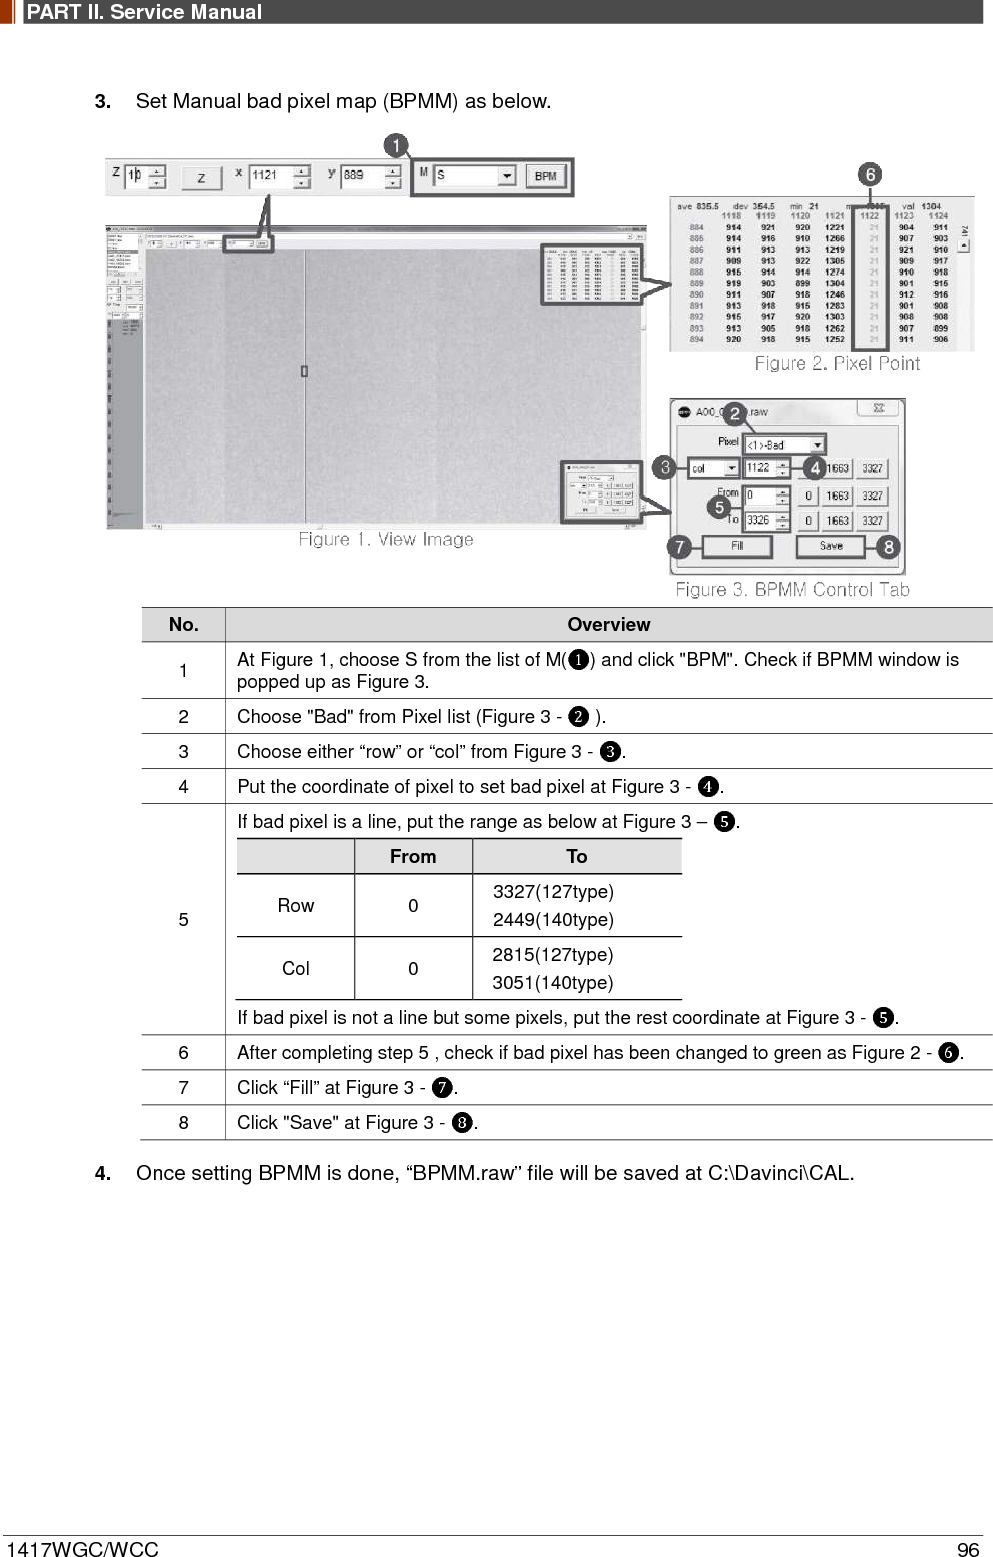 PART II. Service Manual  1417WGC/WCC 96 3. Set Manual bad pixel map (BPMM) as below.  No. Overview 1  At Figure 1, choose S from the list of M(❶) and click &quot;BPM&quot;. Check if BPMM window is popped up as Figure 3. 2  Choose &quot;Bad&quot; from Pixel list (Figure 3 - ❷ ). 3  Choose either “row” or “col” from Figure 3 - ❸. 4  Put the coordinate of pixel to set bad pixel at Figure 3 - ❹. 5 If bad pixel is a line, put the range as below at Figure 3 – ❺.  From To Row  0  3327(127type) 2449(140type) Col  0  2815(127type) 3051(140type) If bad pixel is not a line but some pixels, put the rest coordinate at Figure 3 - ❺. 6  After completing step 5 , check if bad pixel has been changed to green as Figure 2 - ❻. 7  Click “Fill” at Figure 3 - ❼. 8  Click &quot;Save&quot; at Figure 3 - ❽. 4. Once setting BPMM is done, “BPMM.raw” file will be saved at C:\Davinci\CAL. 